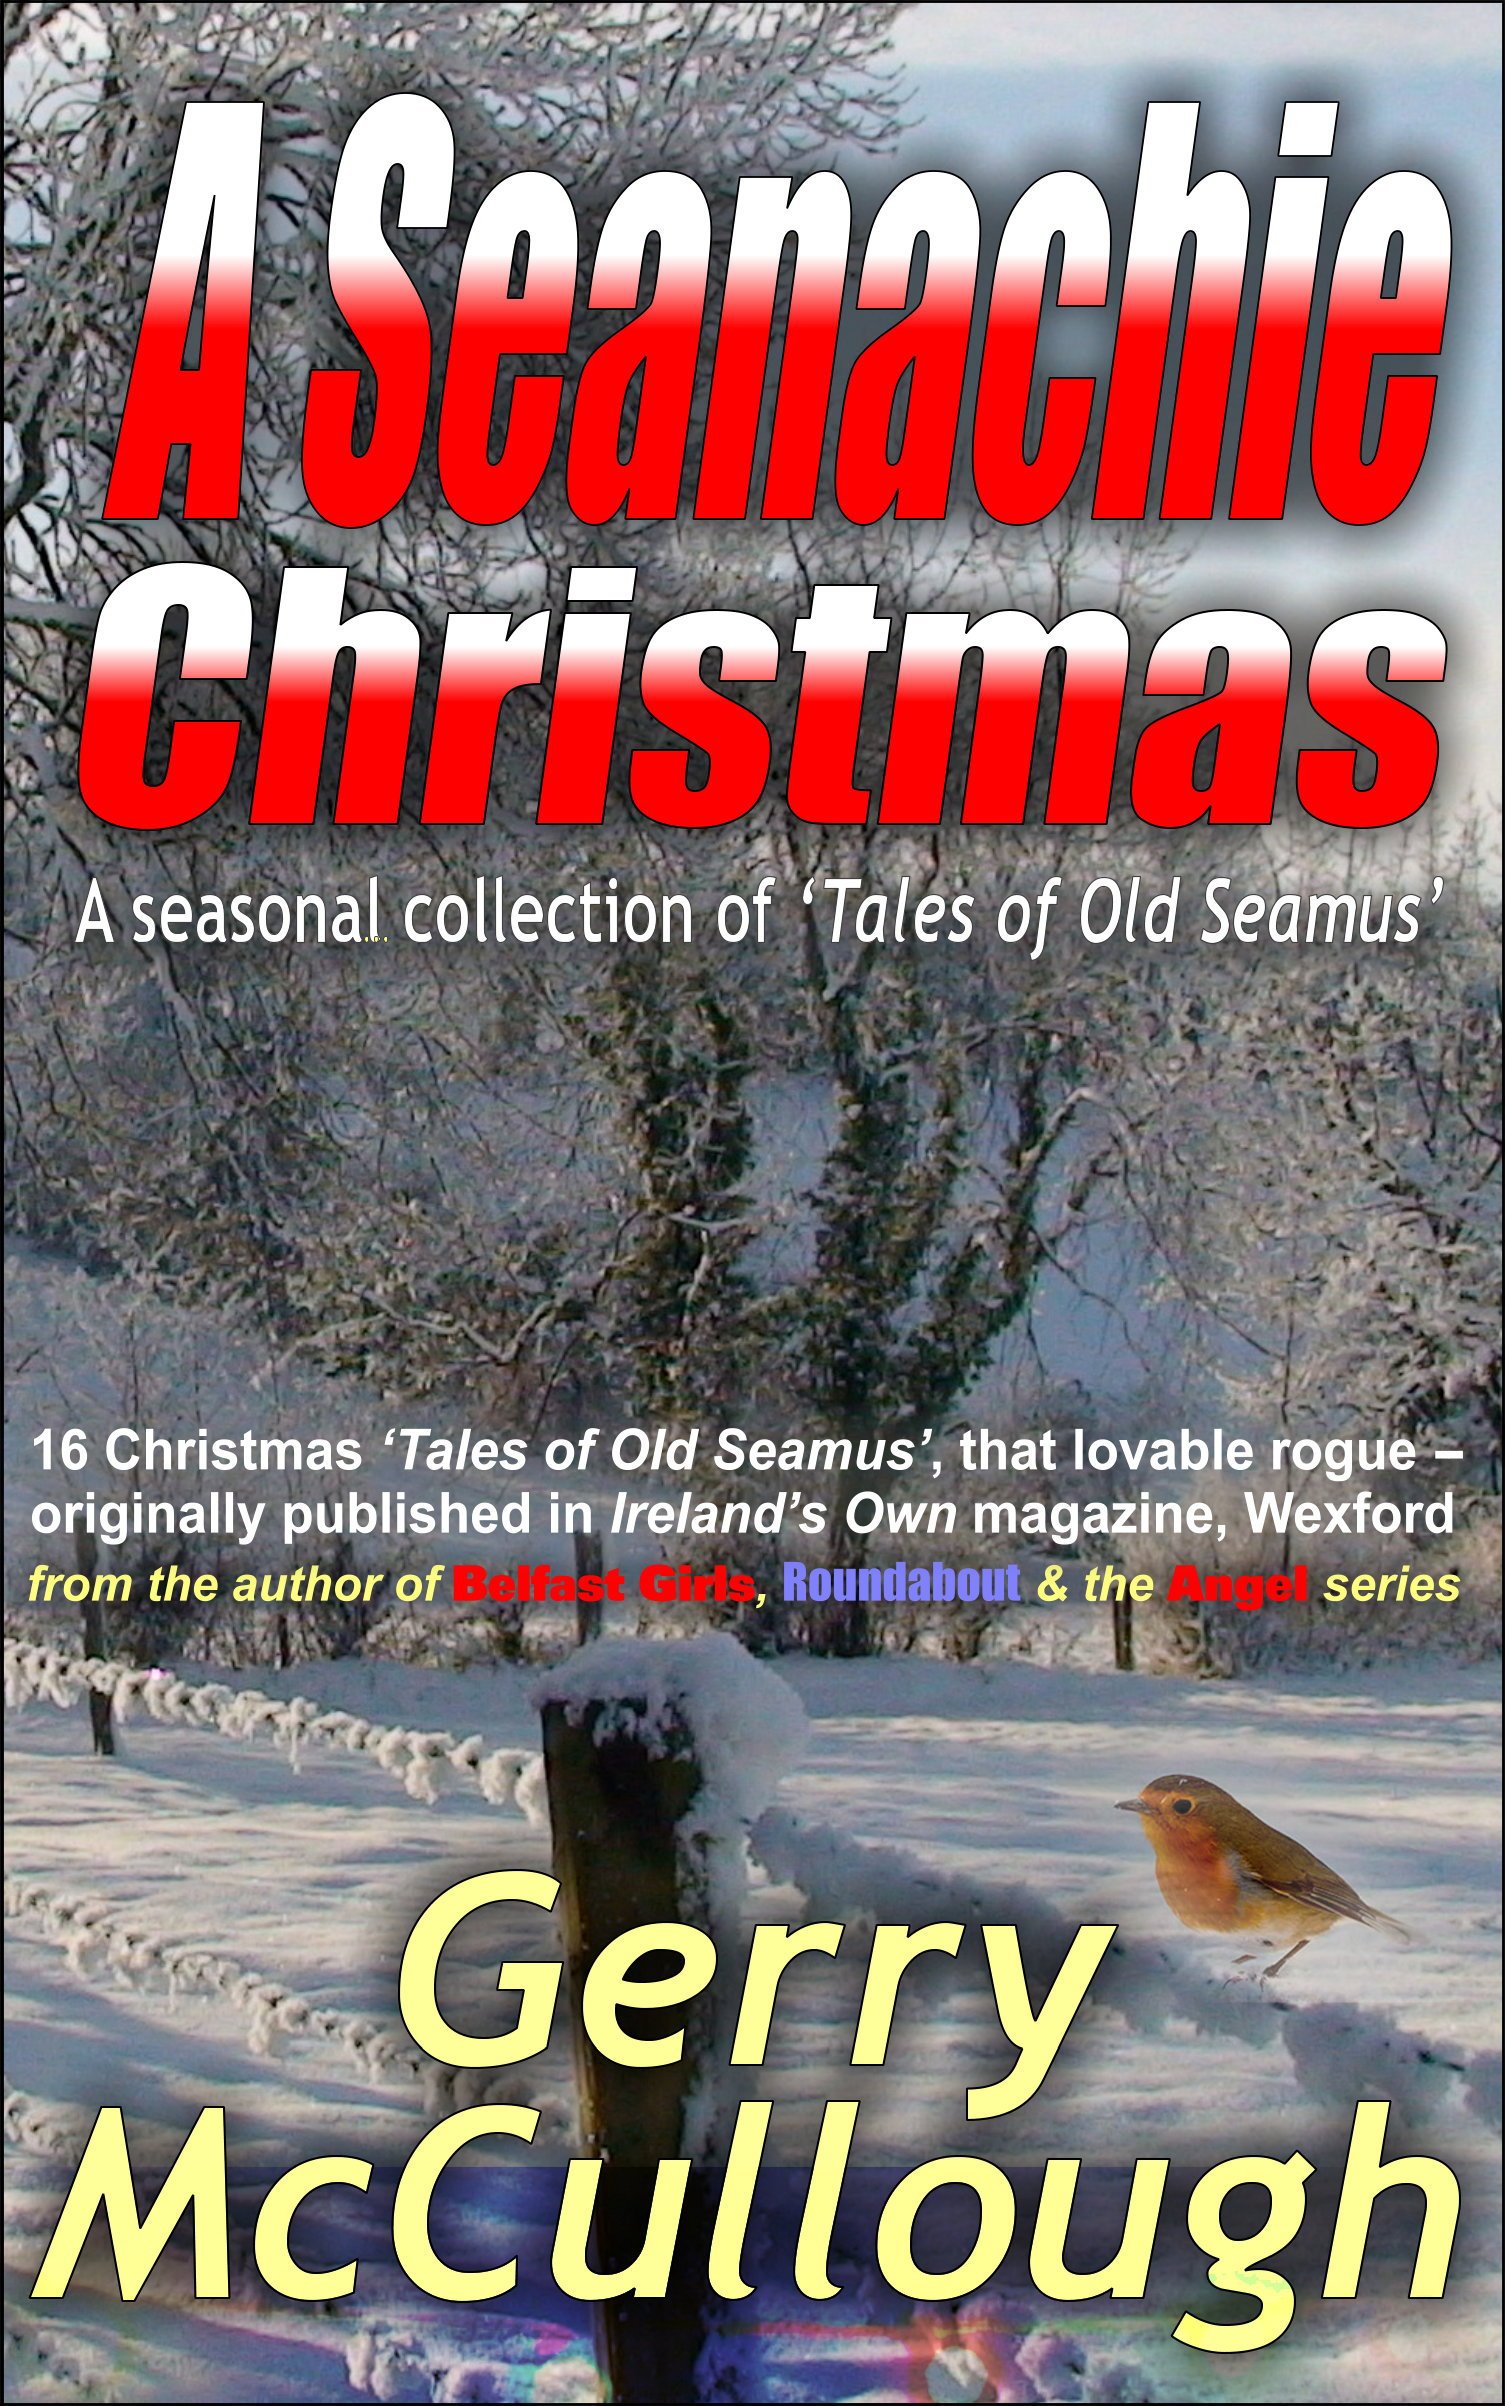 Buy 'A Seanachie Christmas: a seasonal collection of ‘Tales of Old Seamus’ from Amazon & other outlets